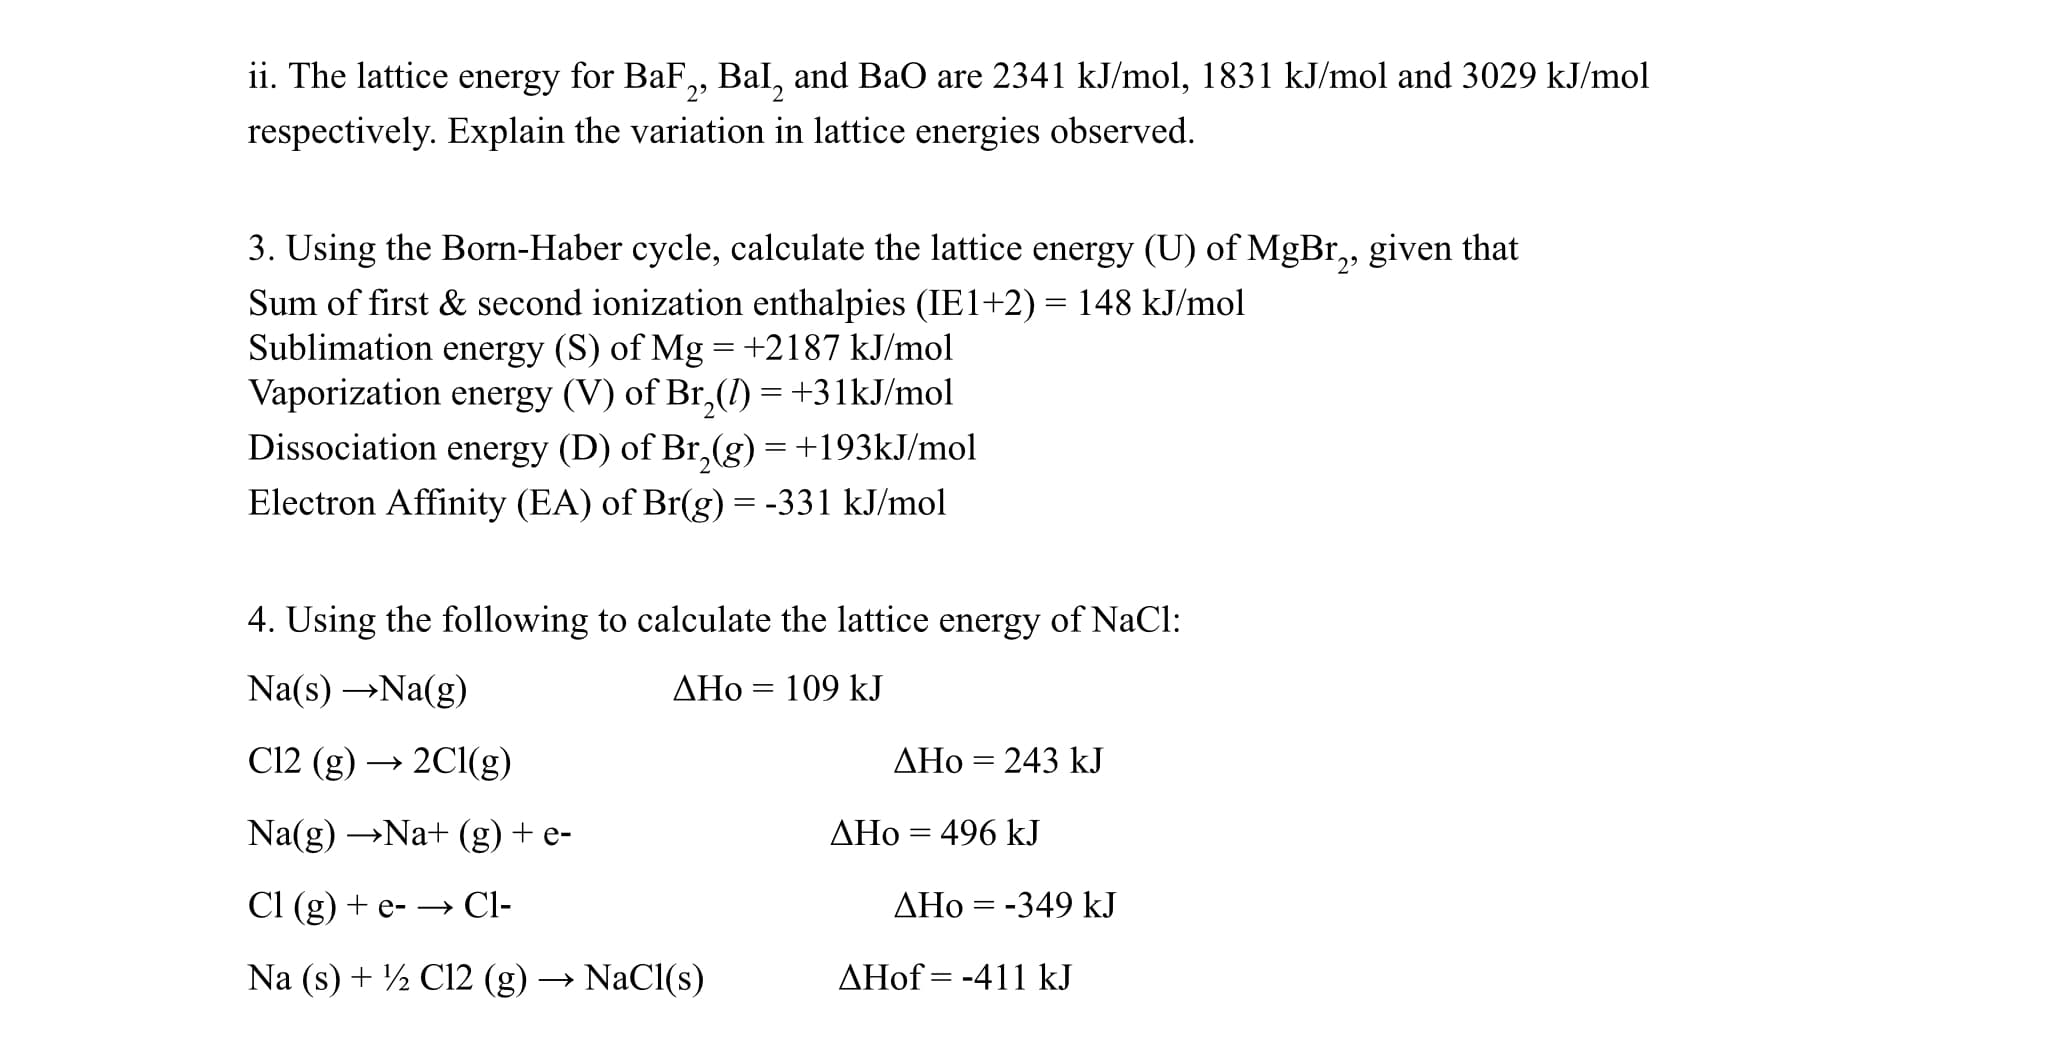 ii. The lattice energy for BaF,, Bal, and BaO are 2341 kJ/mol, 1831 kJ/mol and 3029 kJ/mol
respectively. Explain the variation in lattice energies observed.
3. Using the Born-Haber cycle, calculate the lattice energy (U) of MgBr,, given that
Sum of first & second ionization enthalpies (IE1+2)= 148 kJ/mol
Sublimation energy (S) of Mg =+2187 kJ/mol
Vaporization energy (V) of Br,() =+31KJ/mol
Dissociation energy (D) of Br,(g) =+193KJ/mol
Electron Affinity (EA) of Br(g) = -331 kJ/mol
29
4. Using the following to calculate the lattice energy of NaCl:
Na(s) →Na(g)
AHo = 109 kJ
%3|
C12 (g) → 2C1(g)
AHo = 243 kJ
Na(g) →Na+ (g) + e-
AHo = 496 kJ
